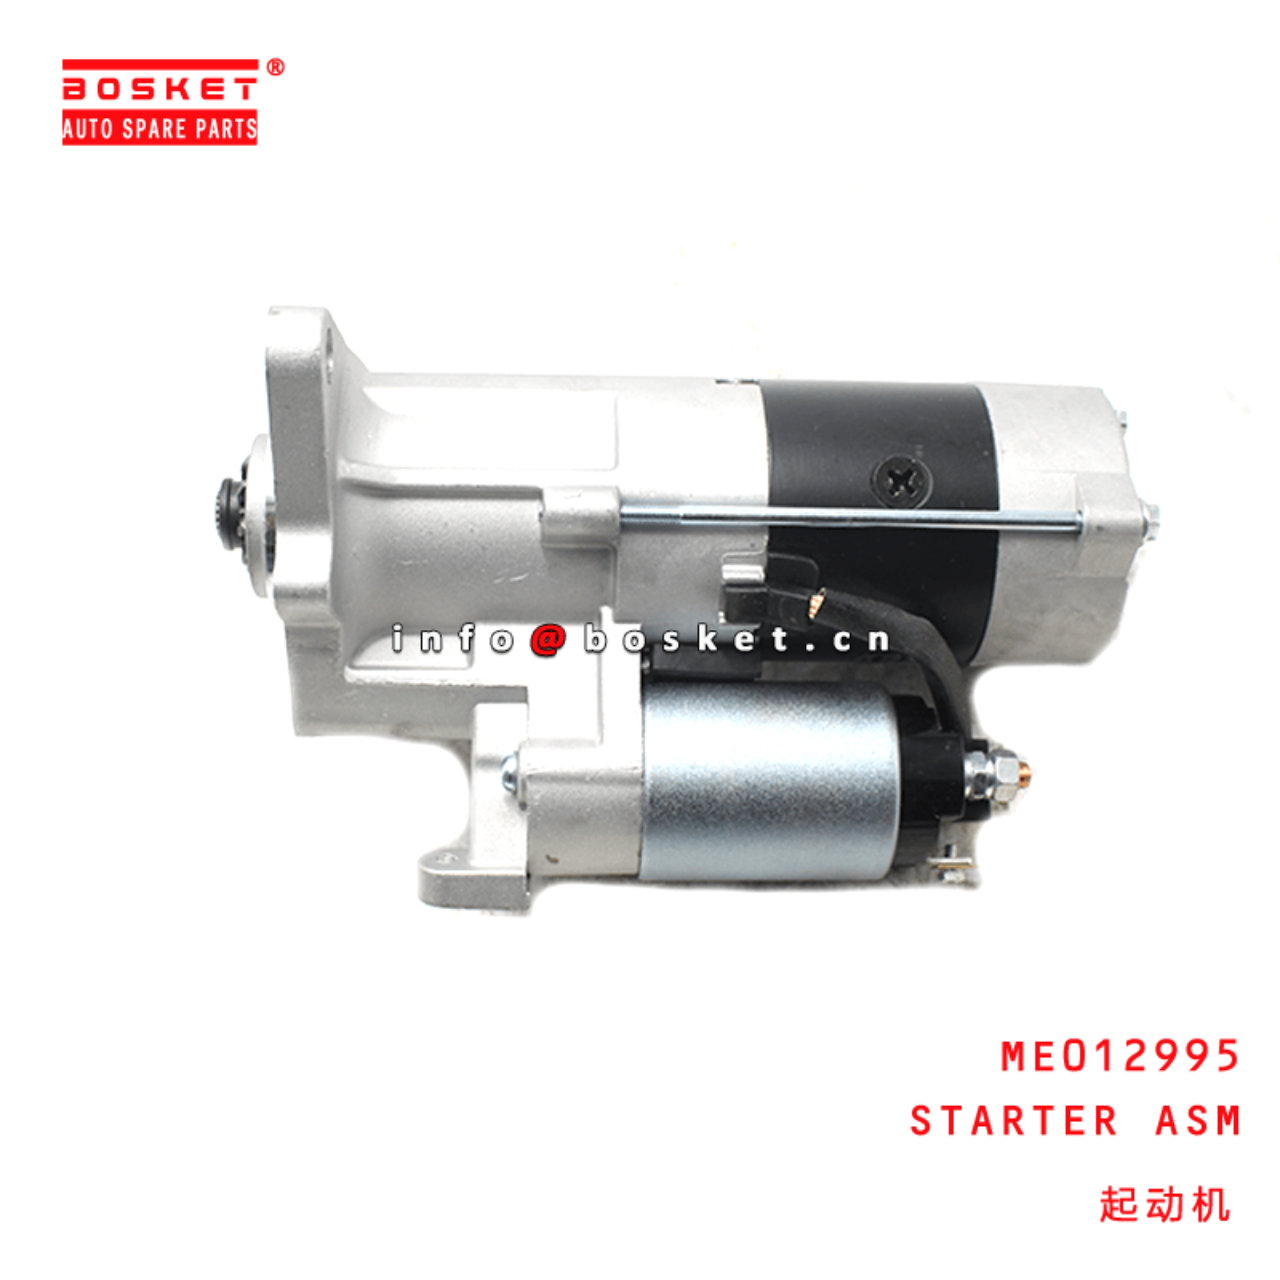 ME012995 Starter Assembly Suitable For MITSUBISHI FUSO 4D34 